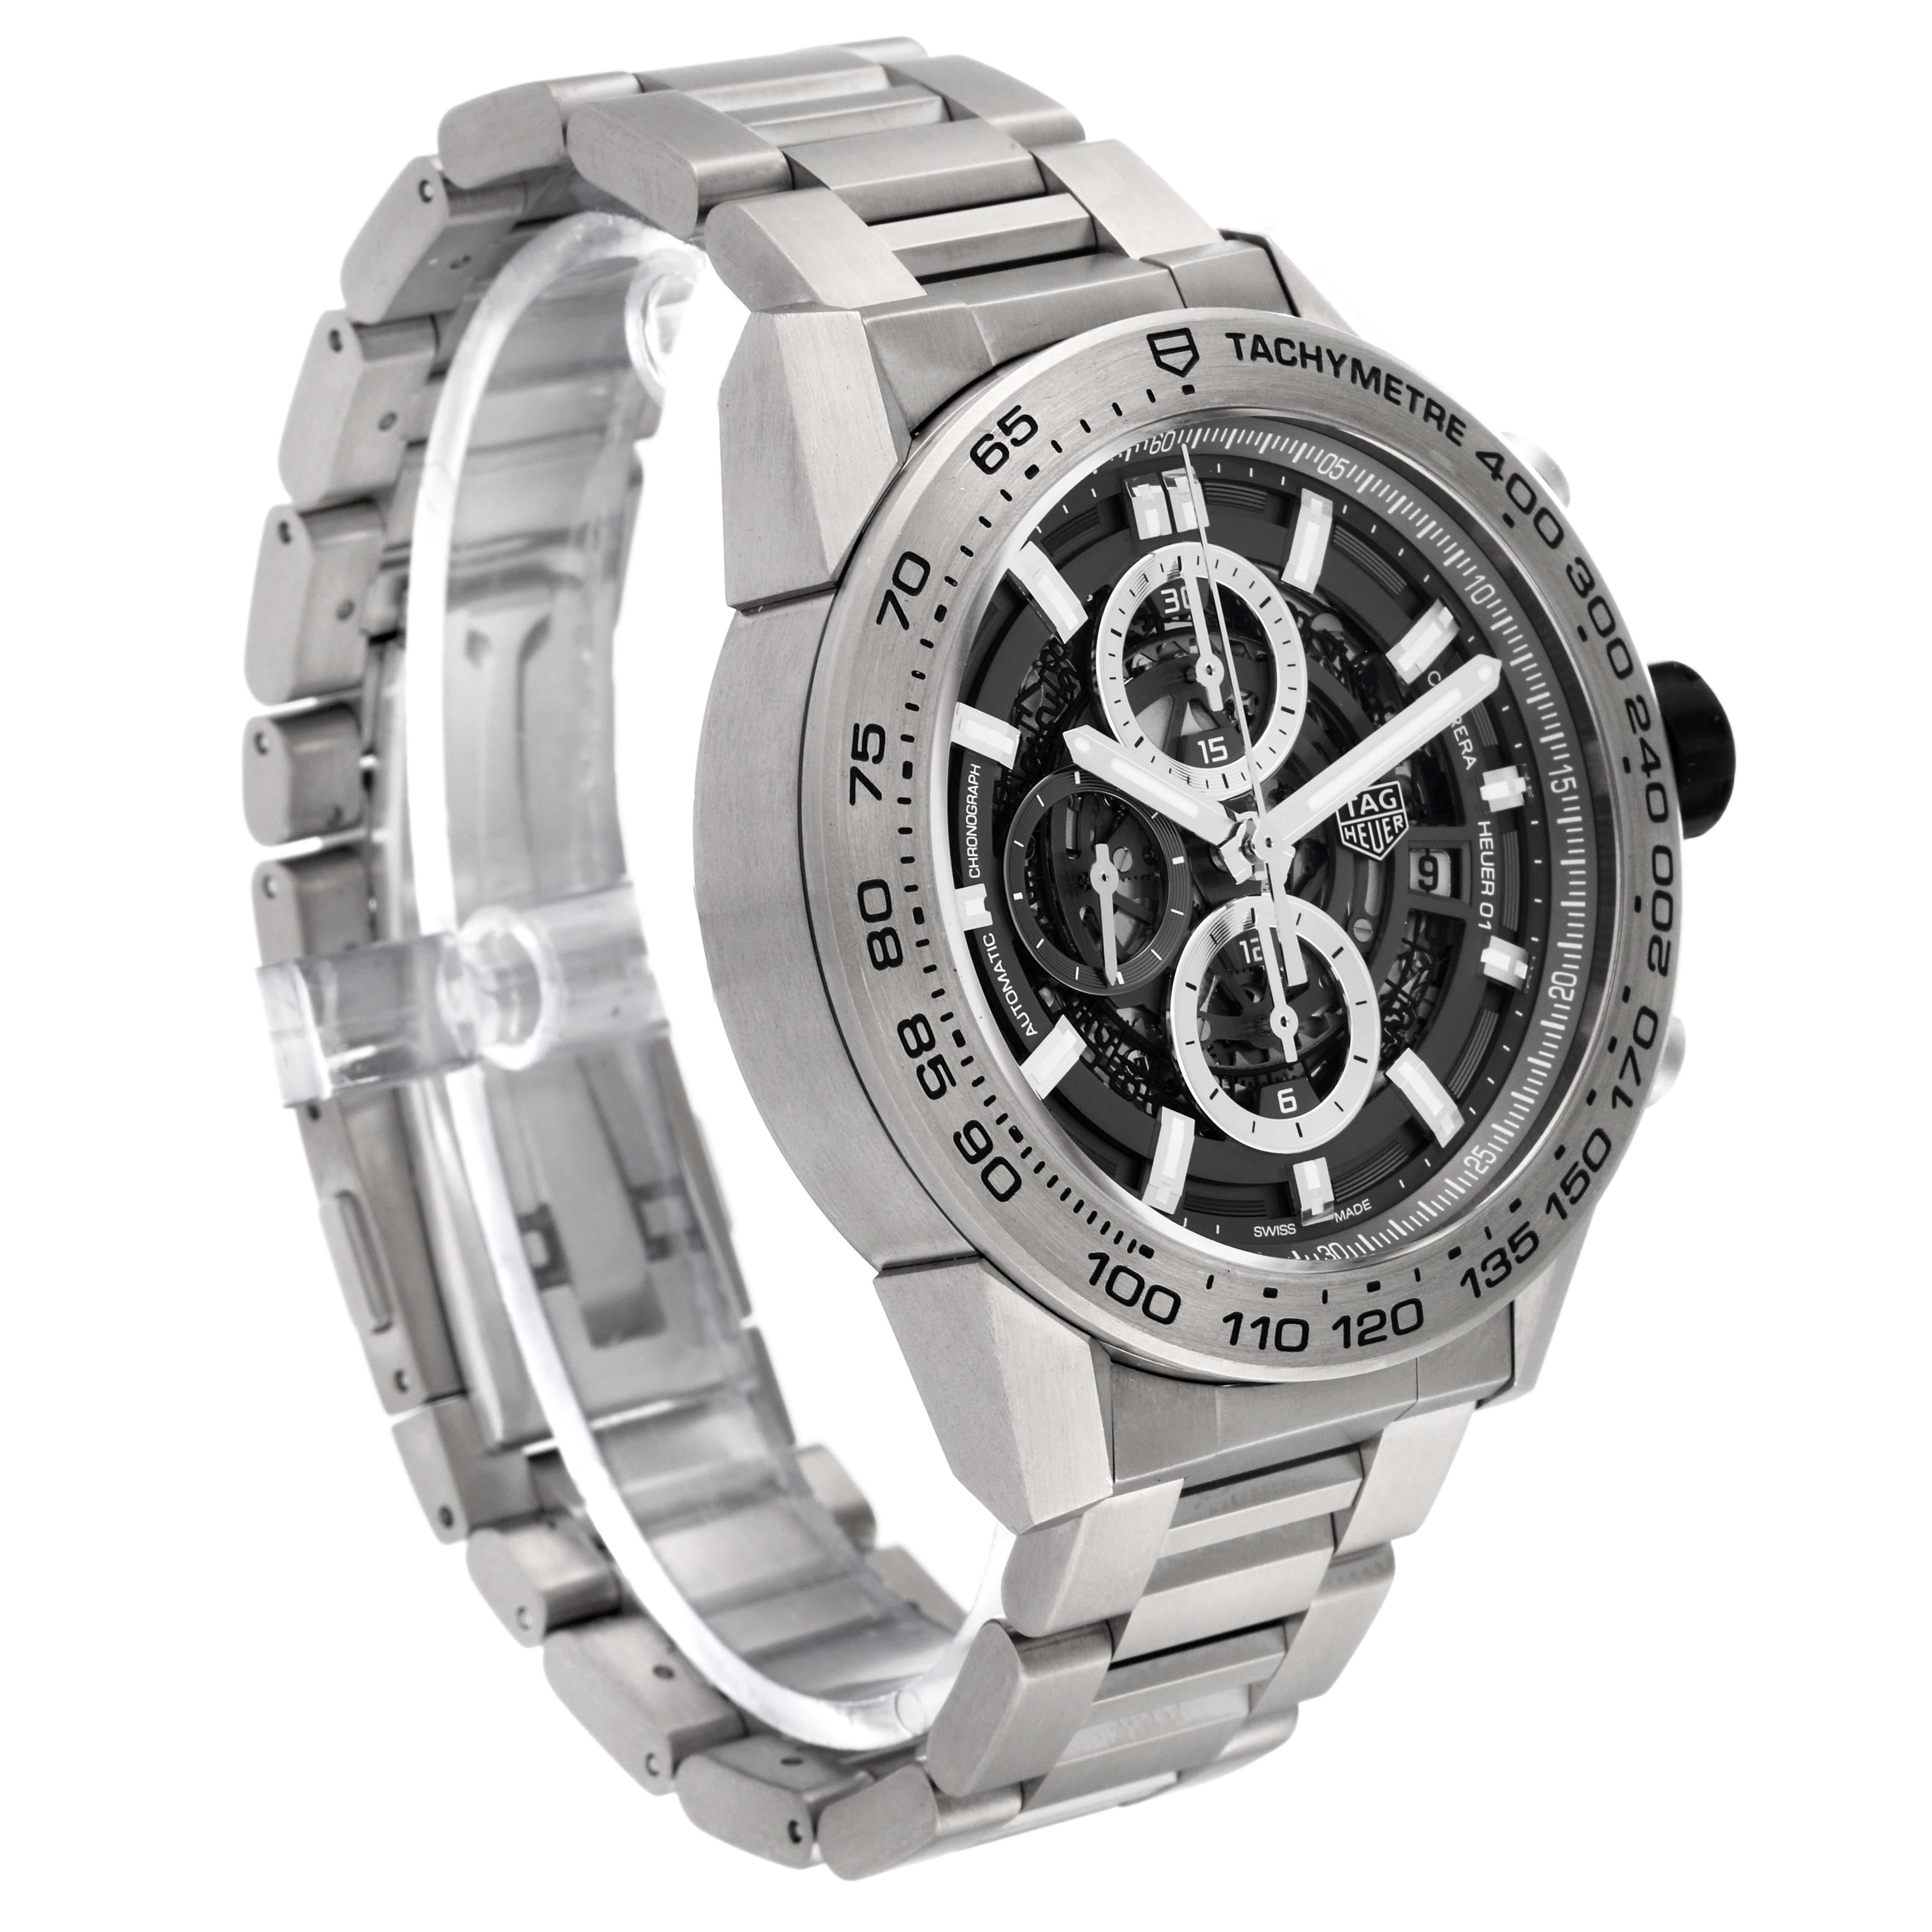 TAG Heuer Carrera Skeleton Dial Titanium Mens Watch CAR2A8A Box Card. Automatic self-winding movement. Titanium case 45 mm in diameter. Case thickness: 16.5 mm. Exhibition transparent sapphire crystal caseback. Steel and rubber crown. Titanium bezel